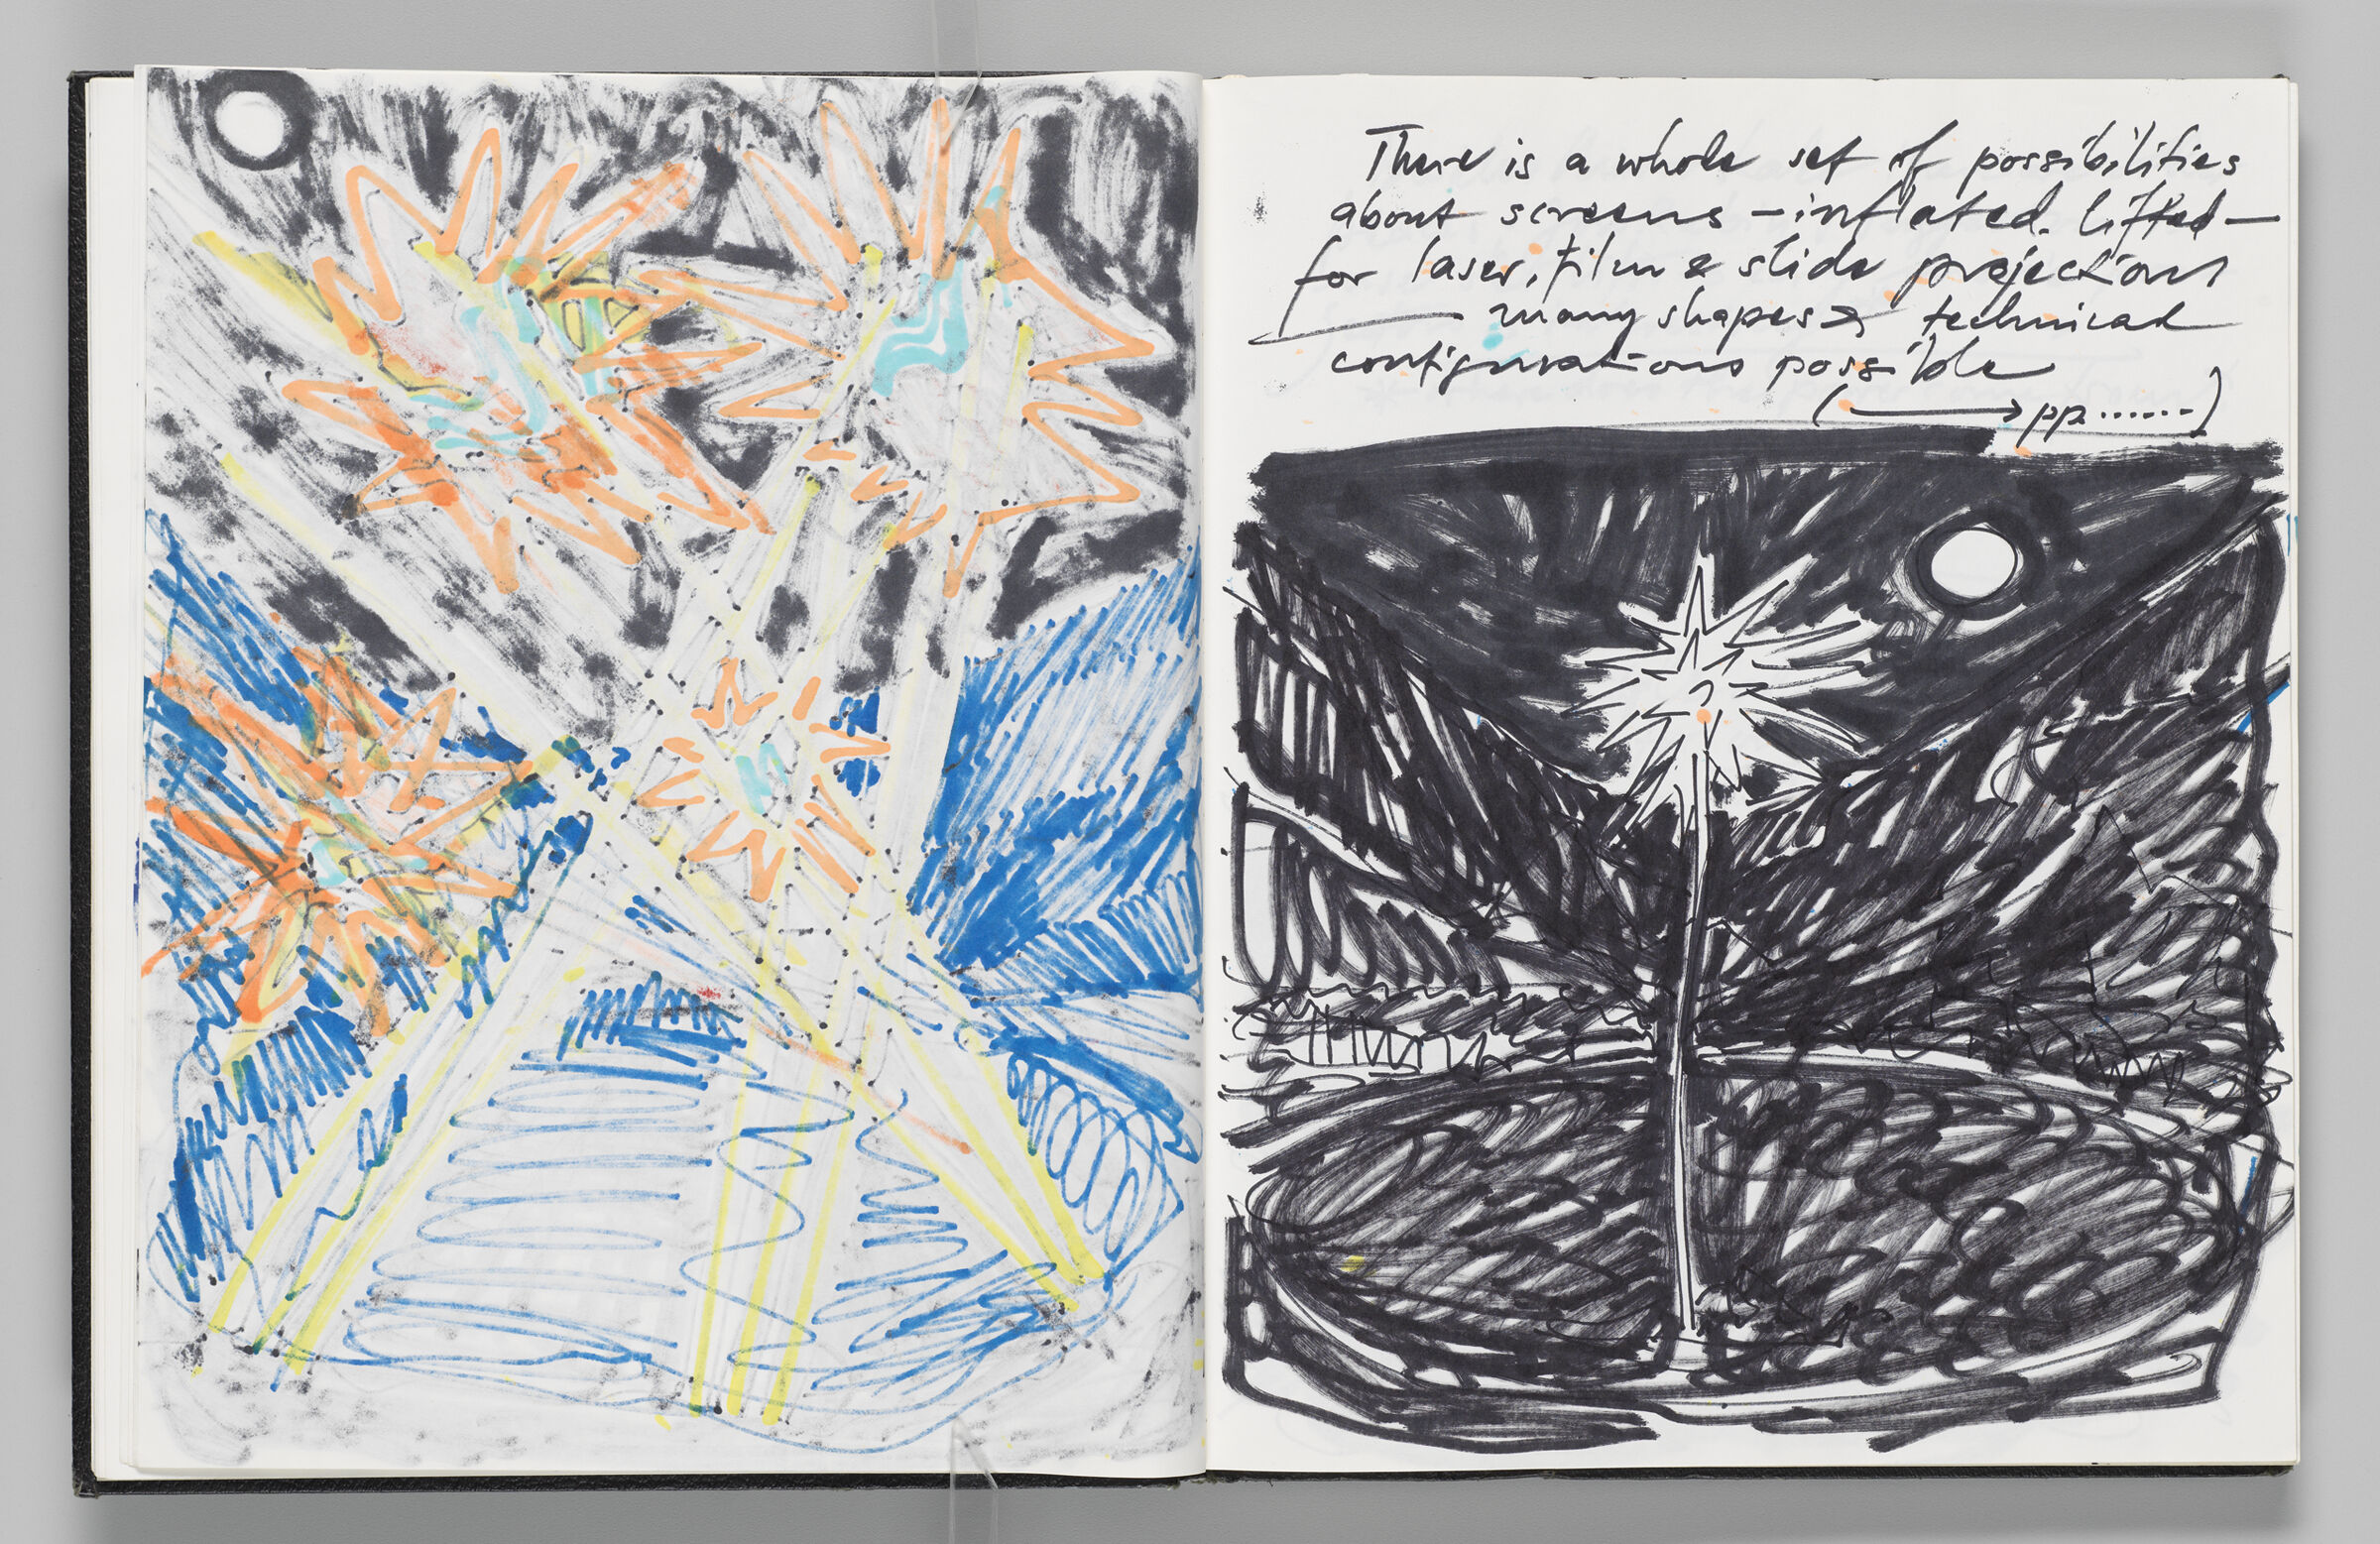 Untitled (Bleed-Through Of Previous Page, Left Page); Untitled (Design For Wind Object And Projections On Mirror Lake, Right Page)